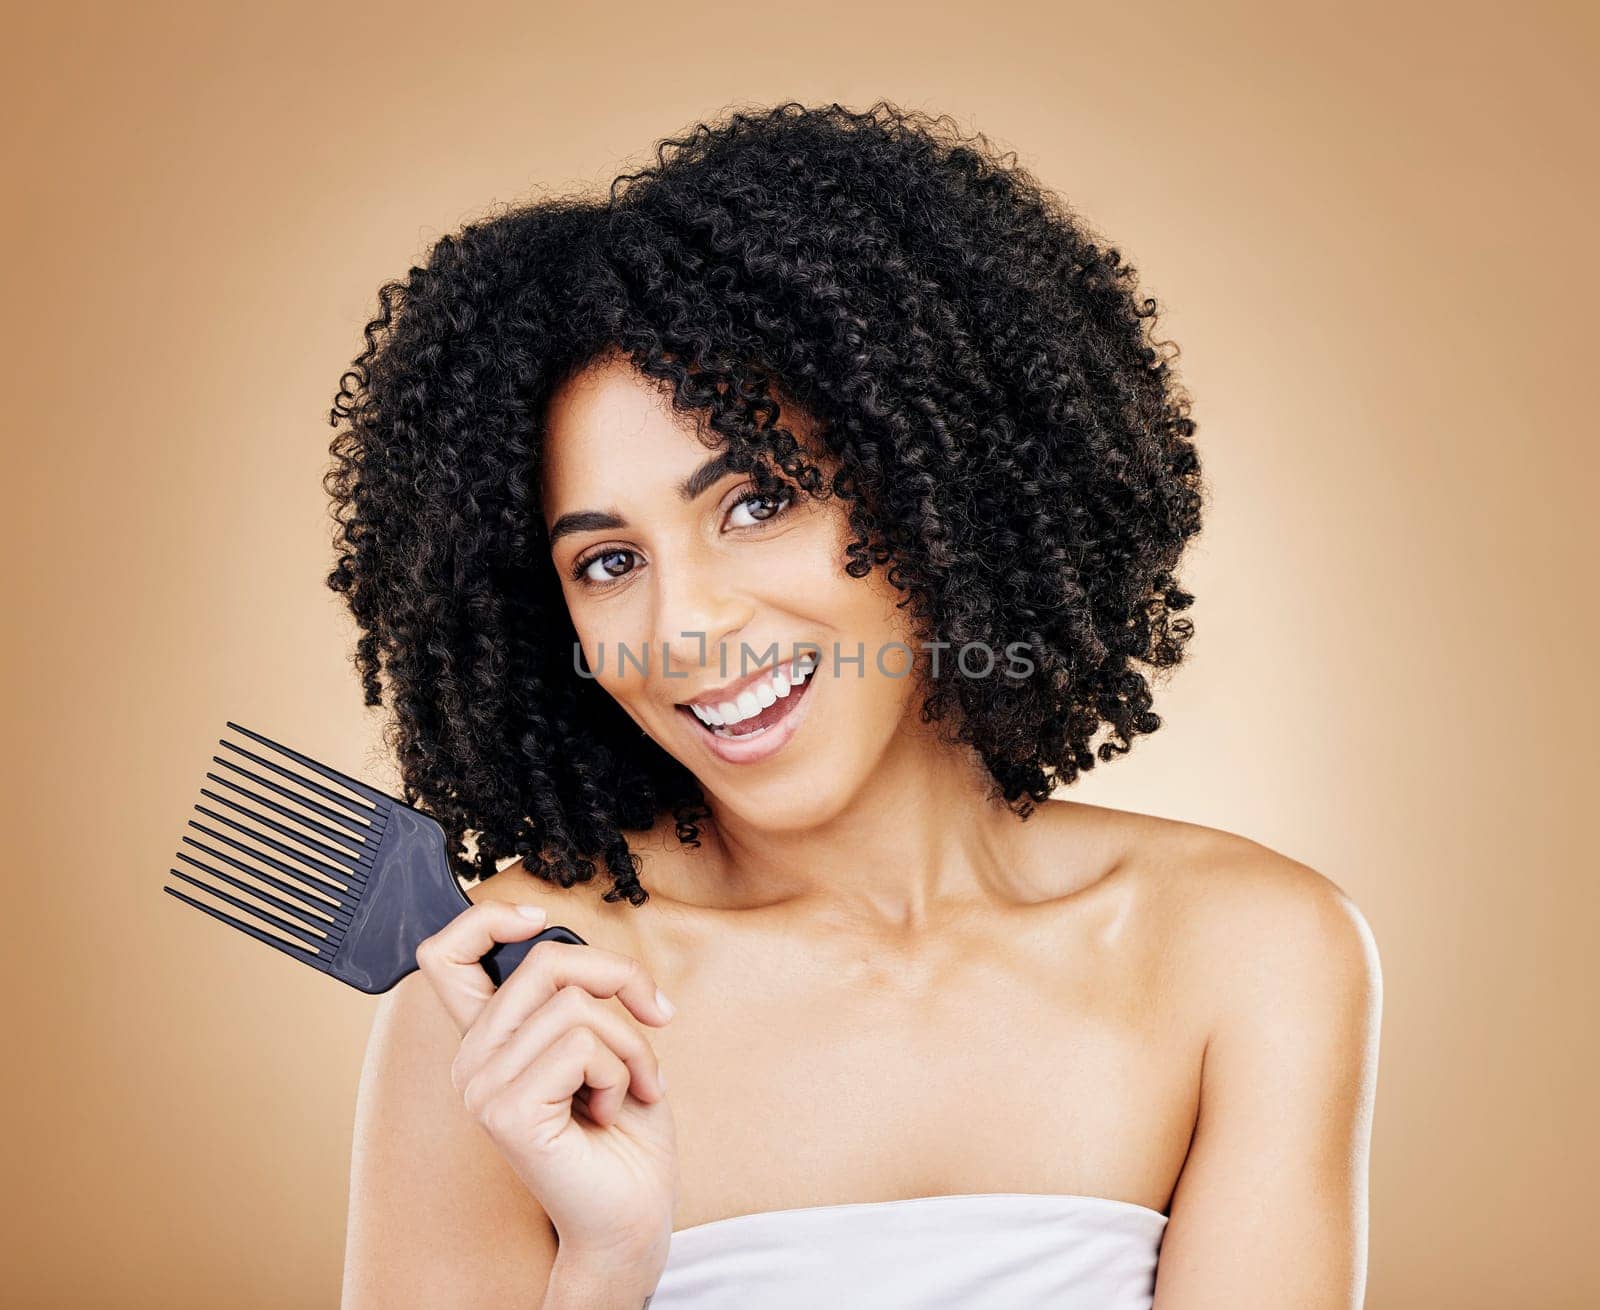 Hair, curls and woman with comb, beauty and treatment for shine, cosmetic care and portrait on studio background. Wellness, haircare and growth with strong texture and brush locks, volume and afro.